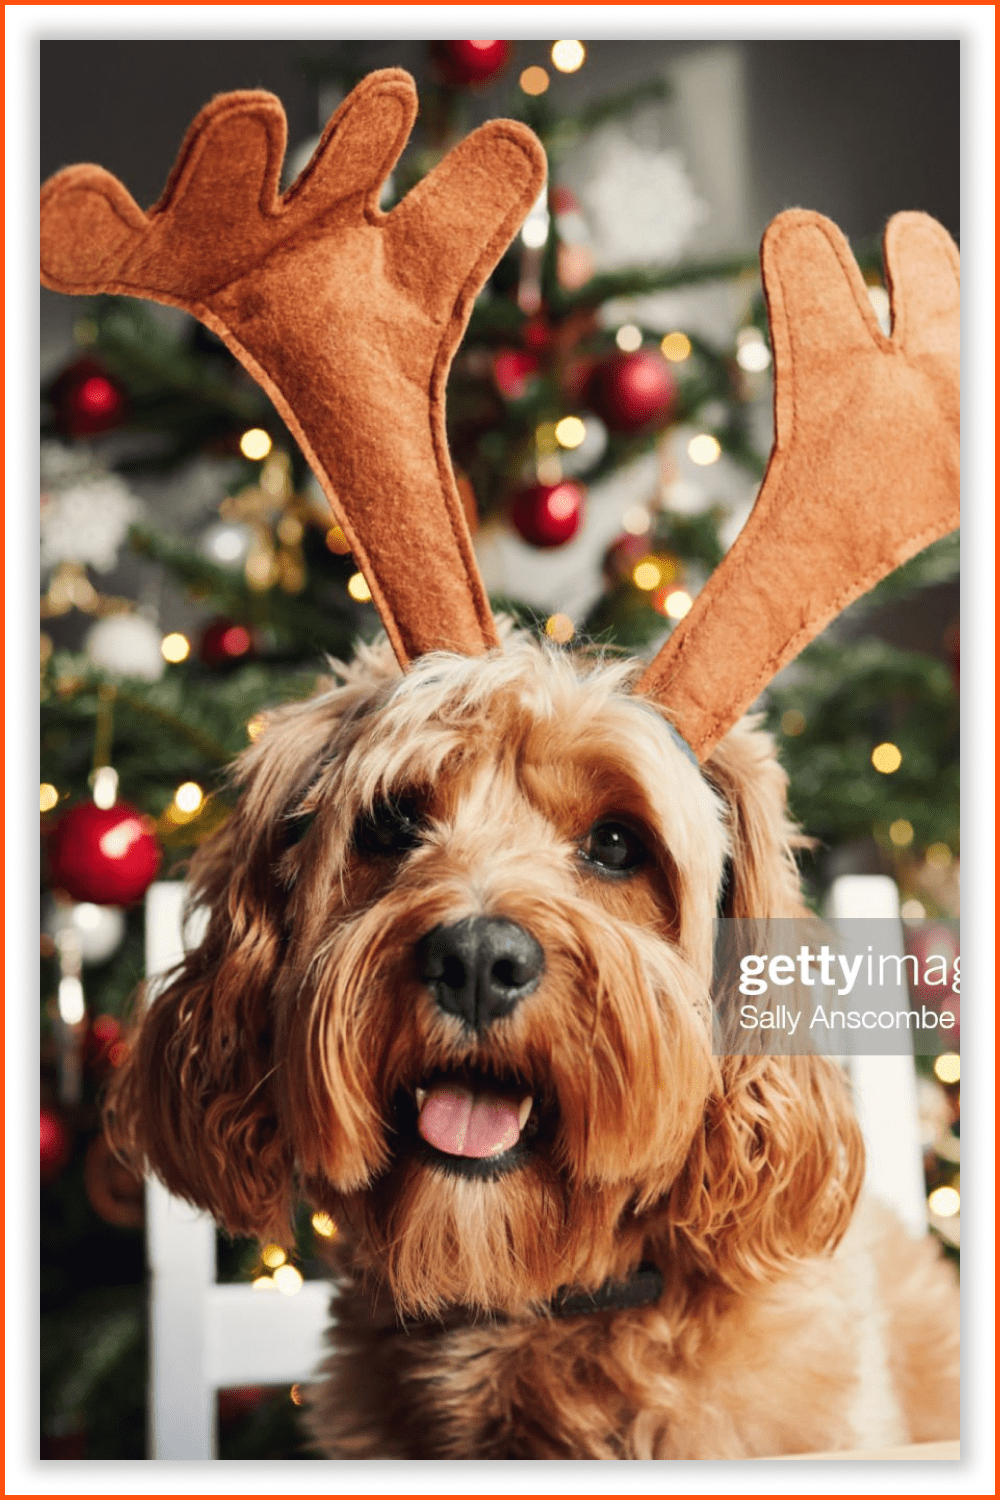 Cute dog in deer antlers with a bright Christmas tree in the background.